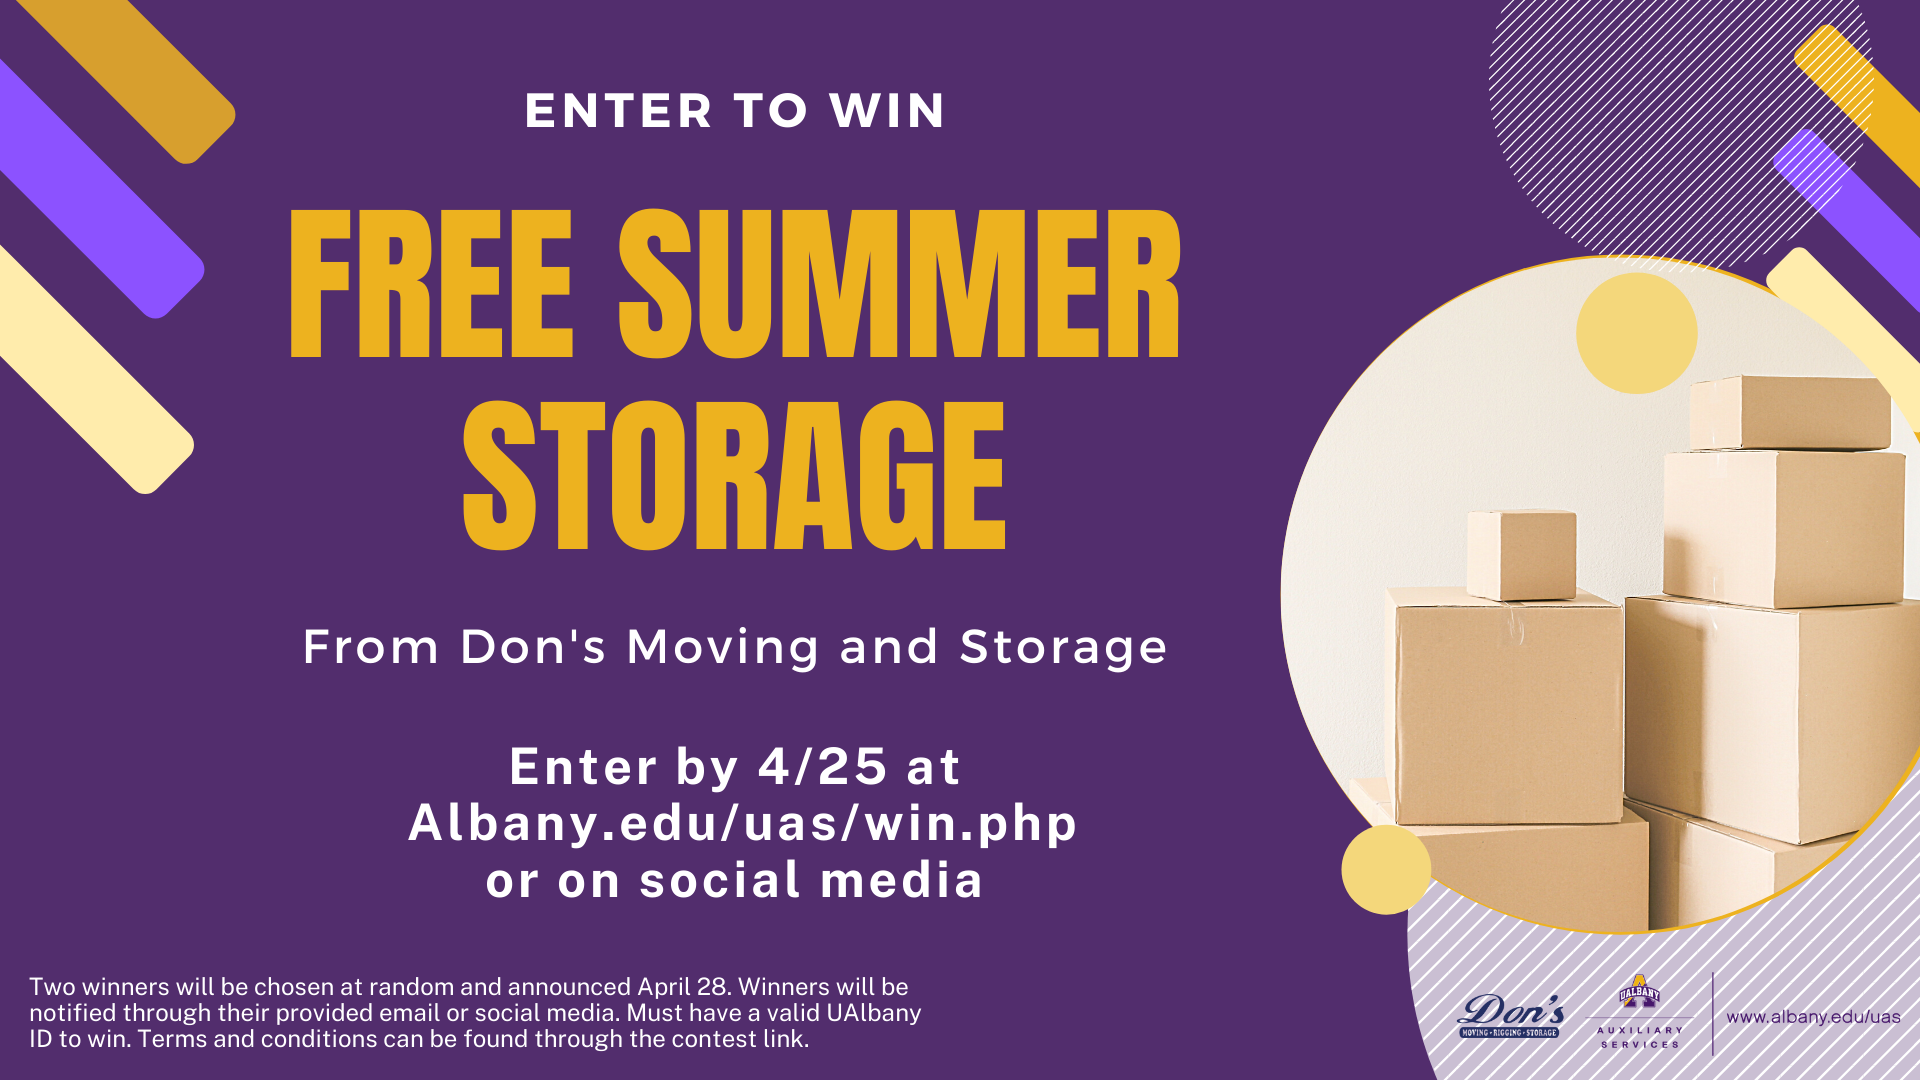 Enter to win Free Summer Storage from Don's Moving and Storage. Enter by 4/25 at Albany.edu/ein.php or on social media. Two winners will be chosen at random and announced April 28th. Winners will be notified through their provided email or social media. Must have a valid UAlbany ID to win. Terms and conditions can be found through the contest link. 